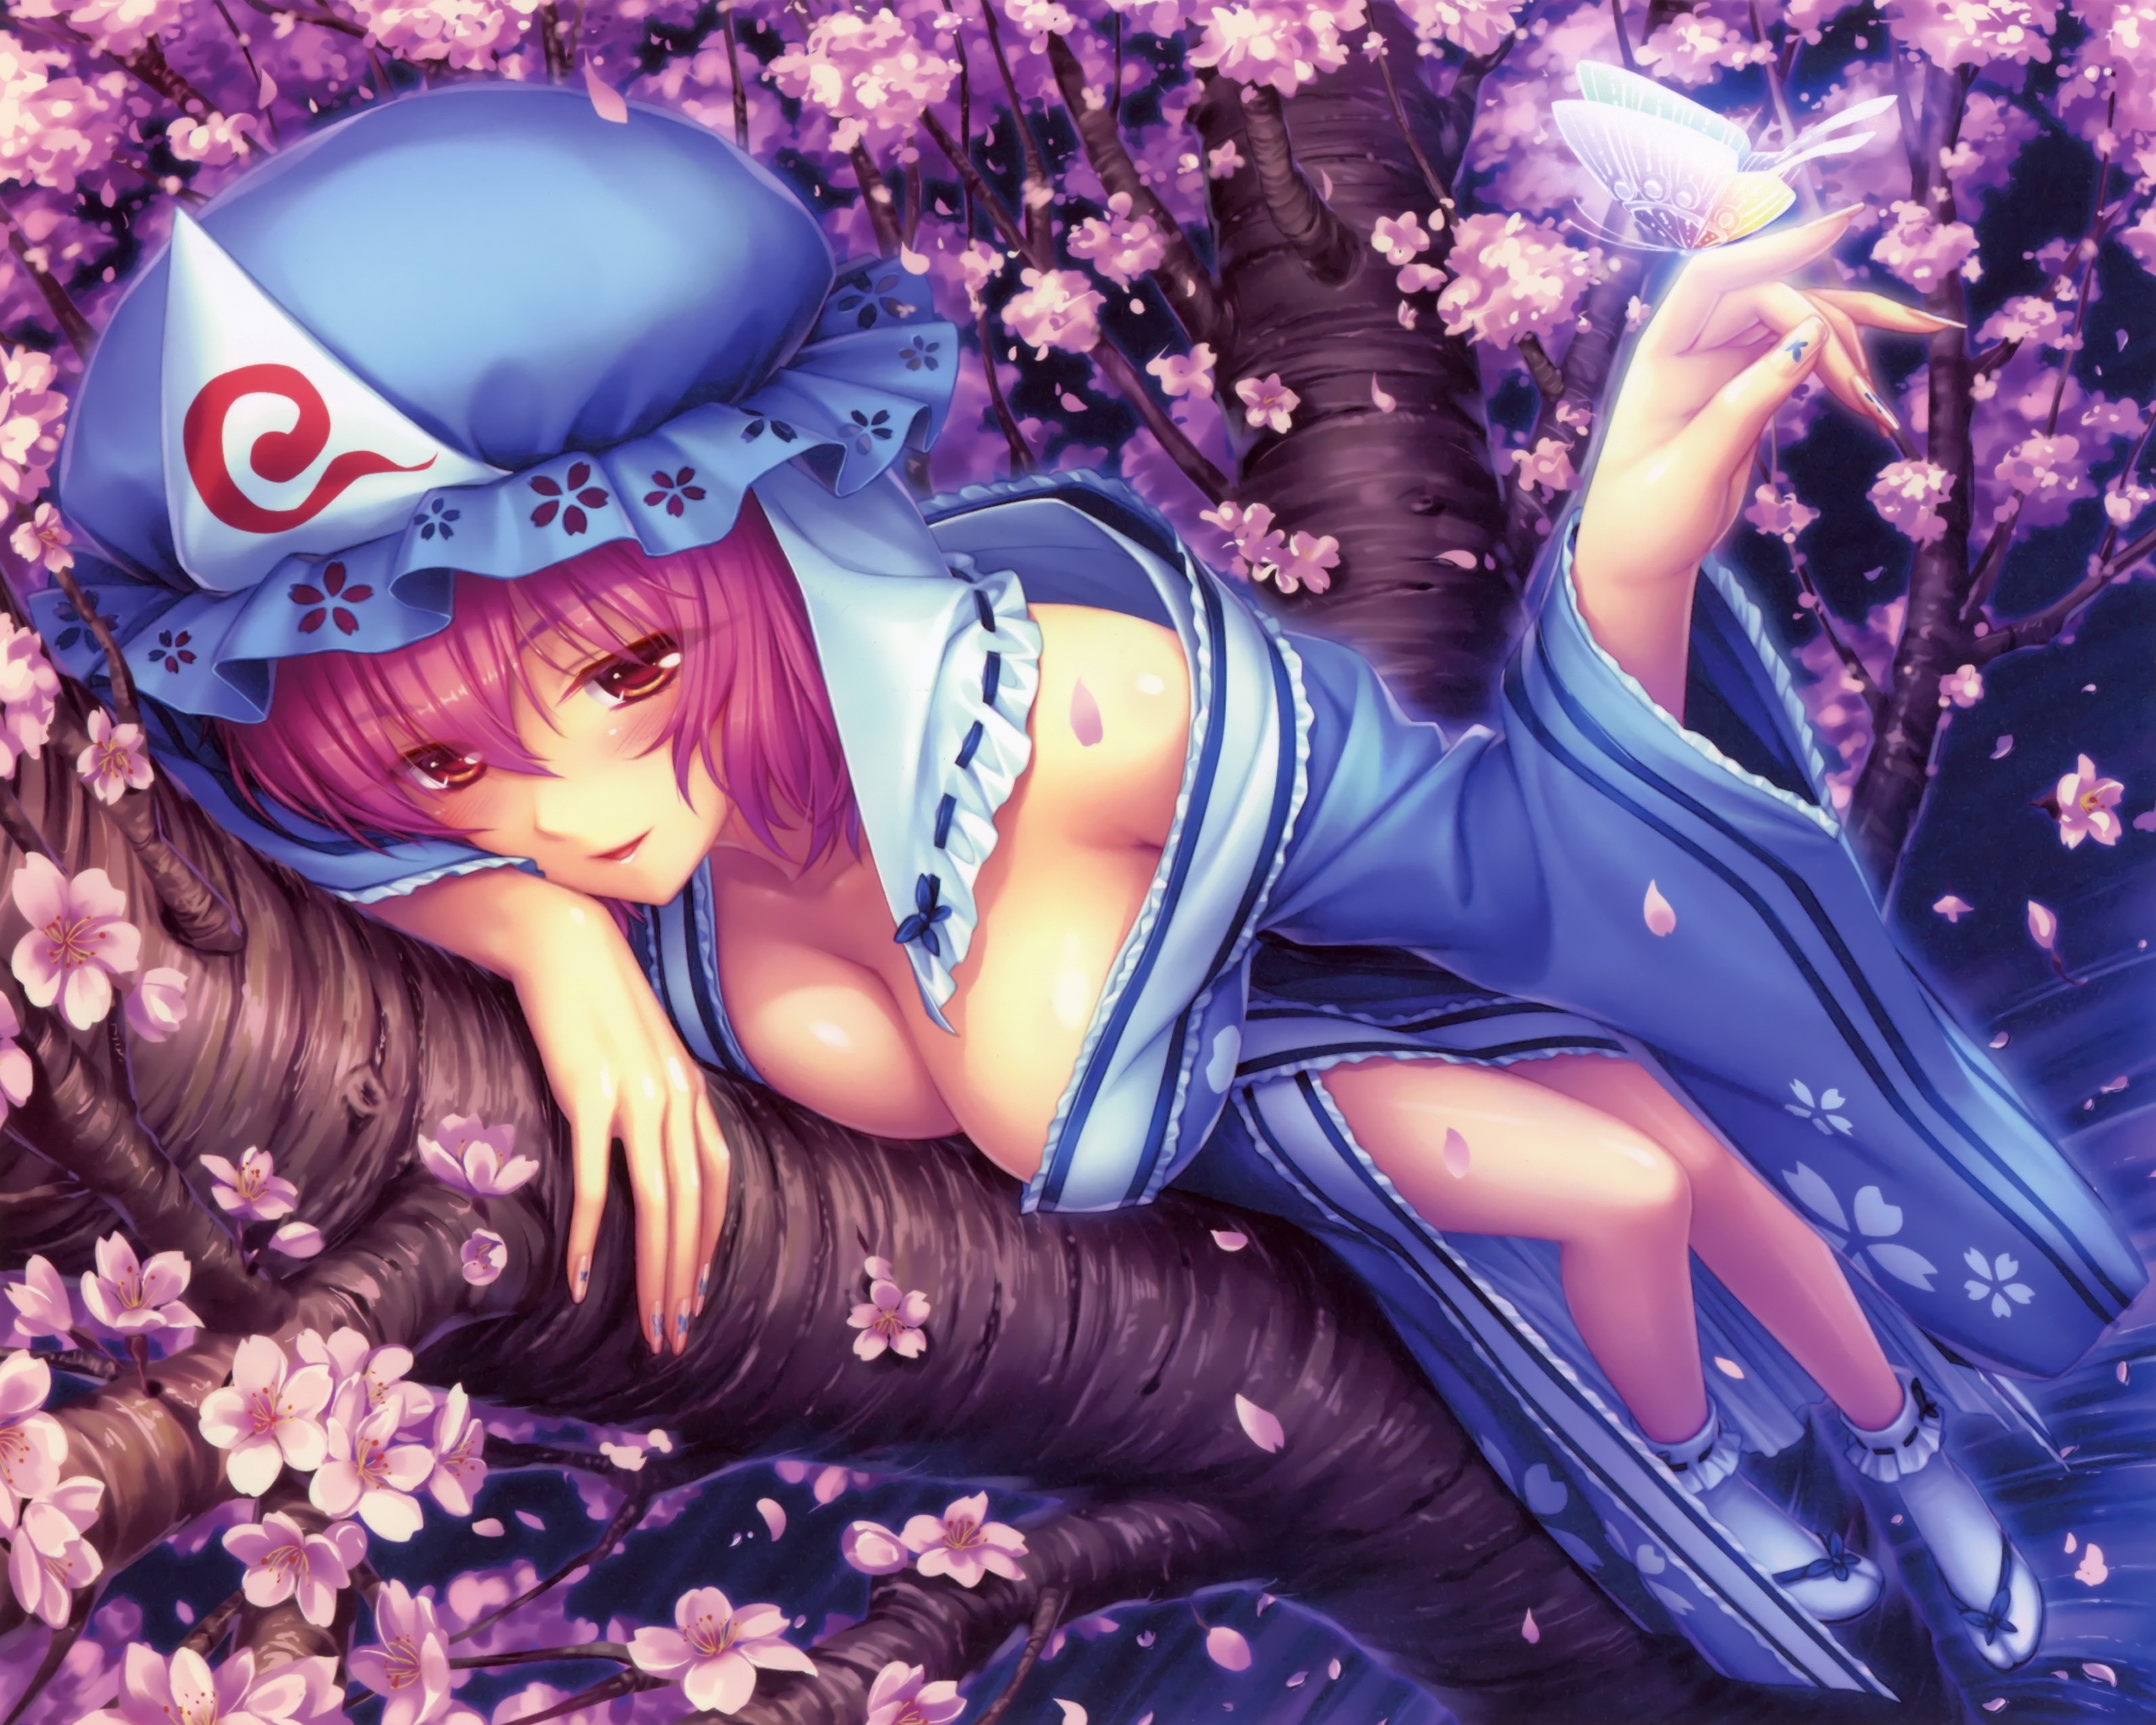 Anime 2802x2242 Touhou video games anime girls bangs Sayori Saigyouji Yuyuko hat red eyes pink hair cleavage kimono dress blue dress Japanese clothes socks painted nails petals trees lying on front butterfly cherry blossom sandals boobs Pixiv fantasy art fantasy girl women anime women with hats